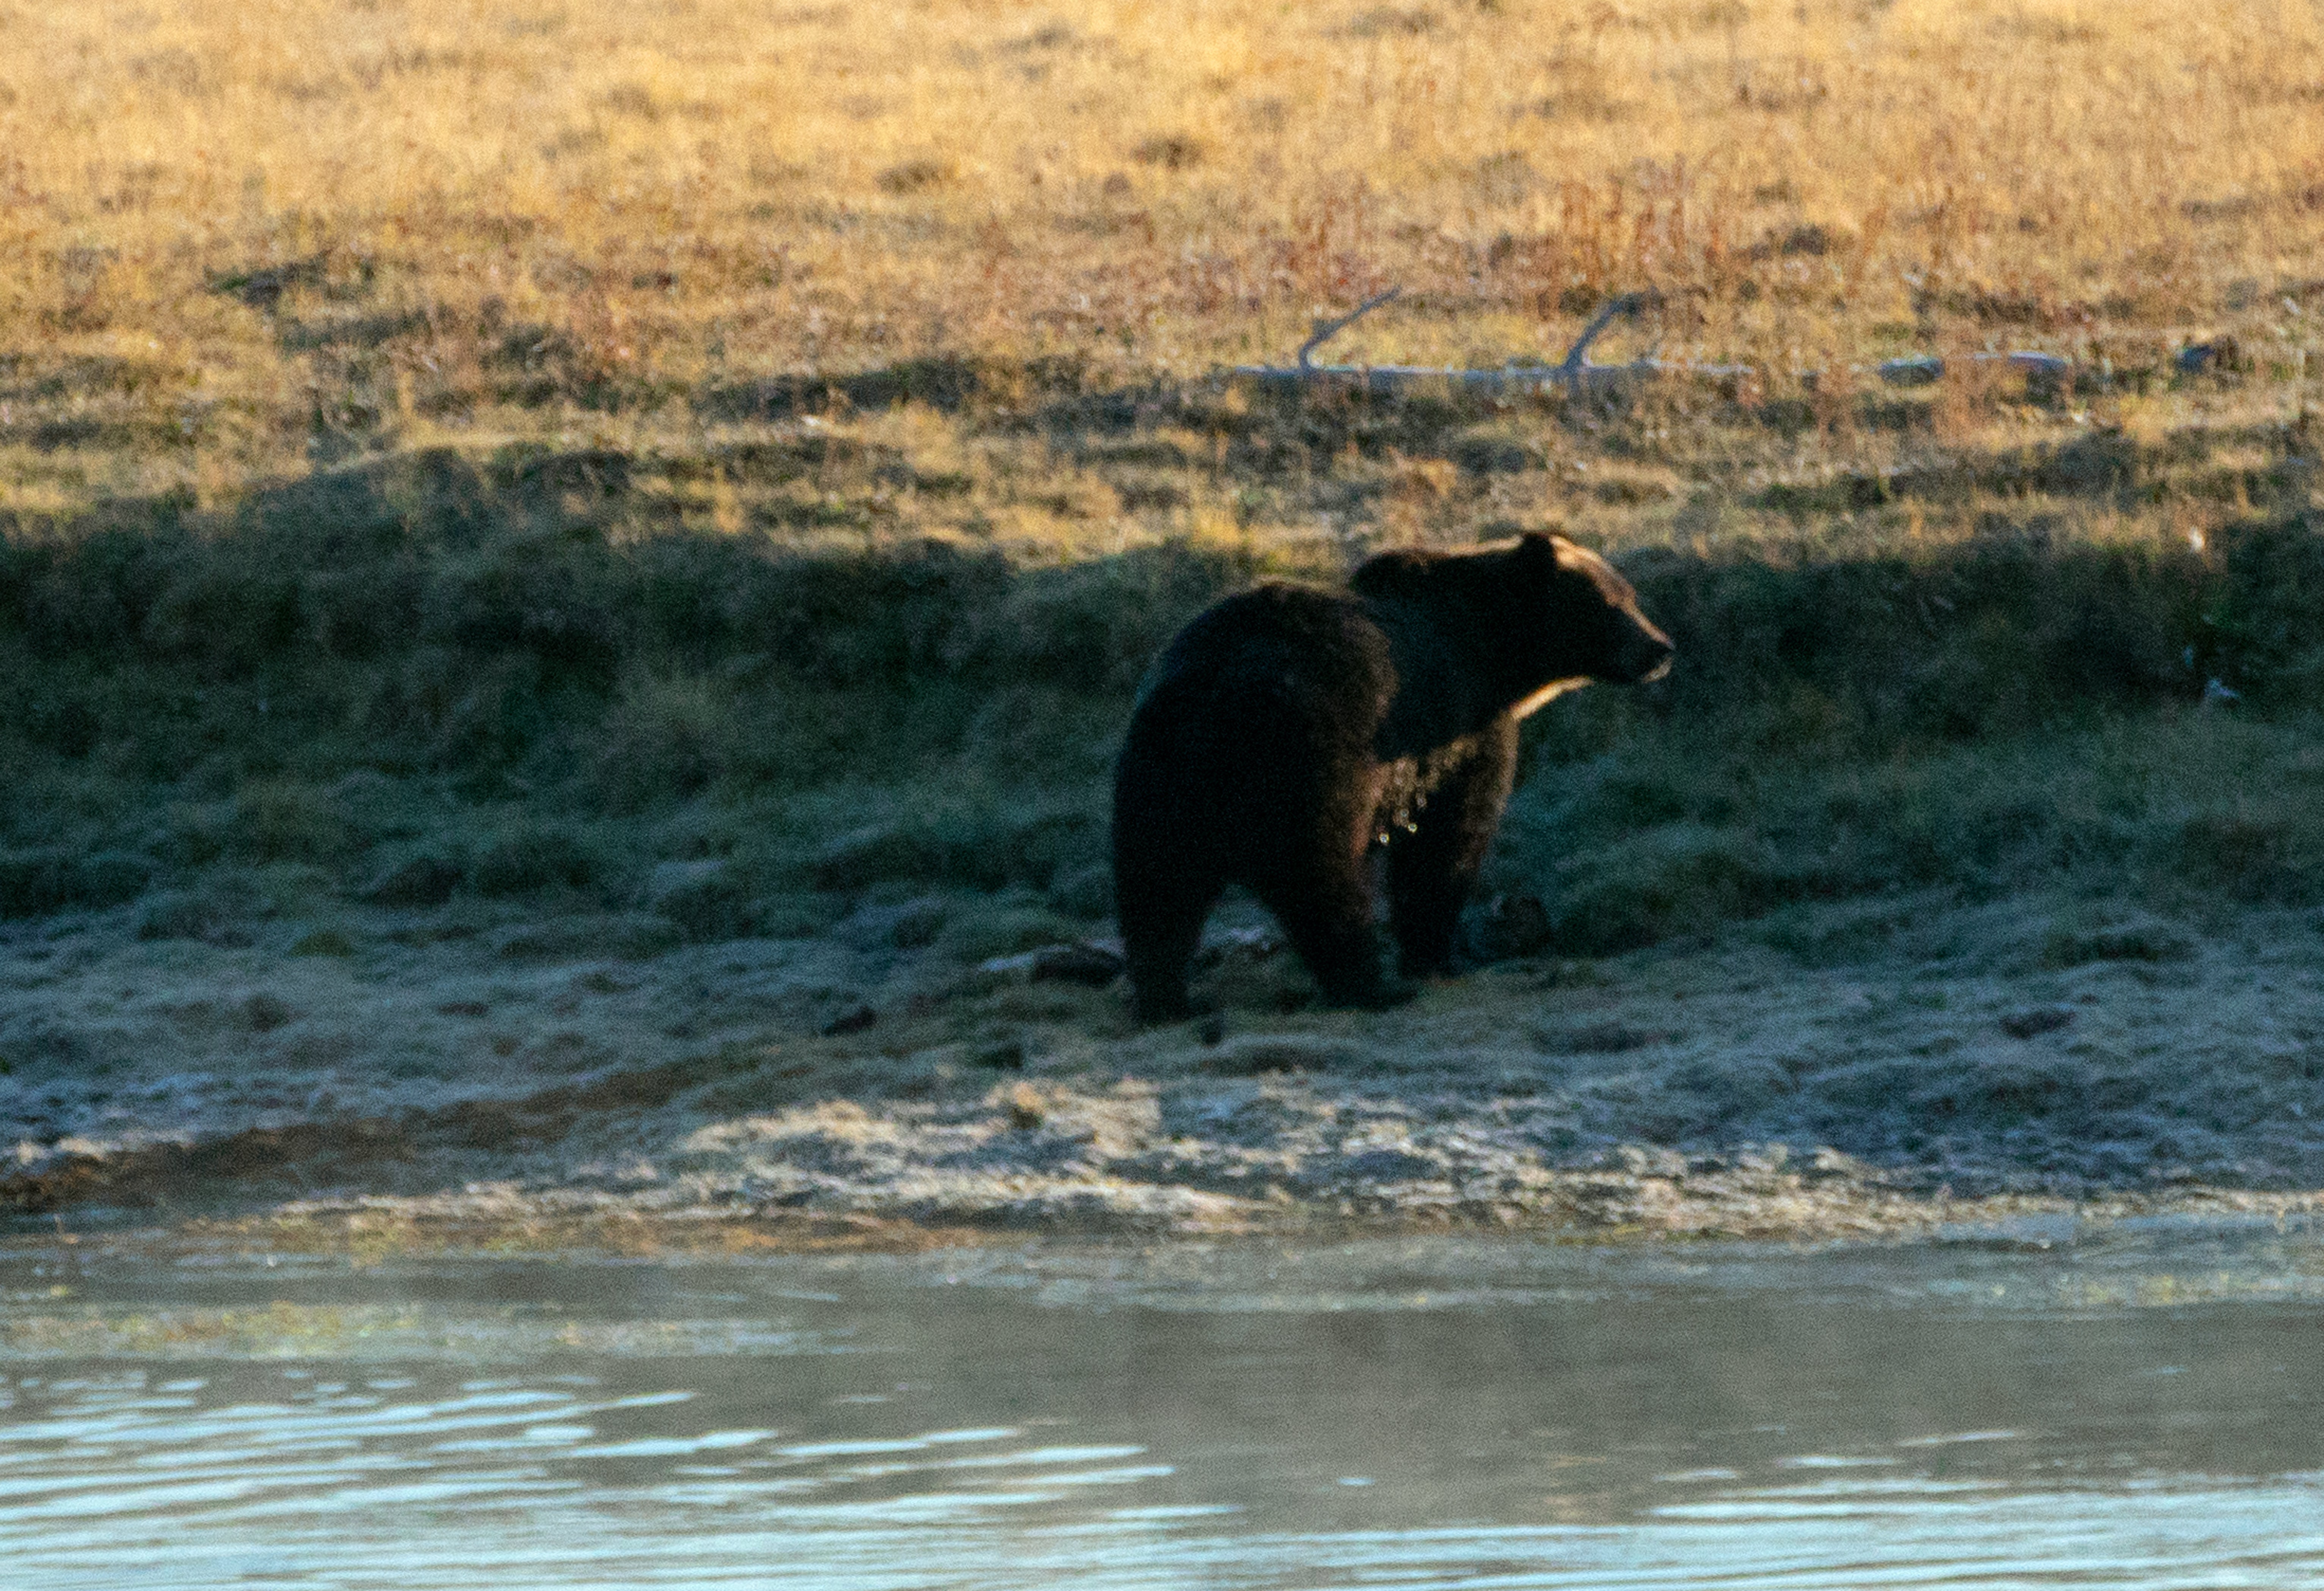 Representational image: A male grizzly bear on the banks of the Yellowstone river